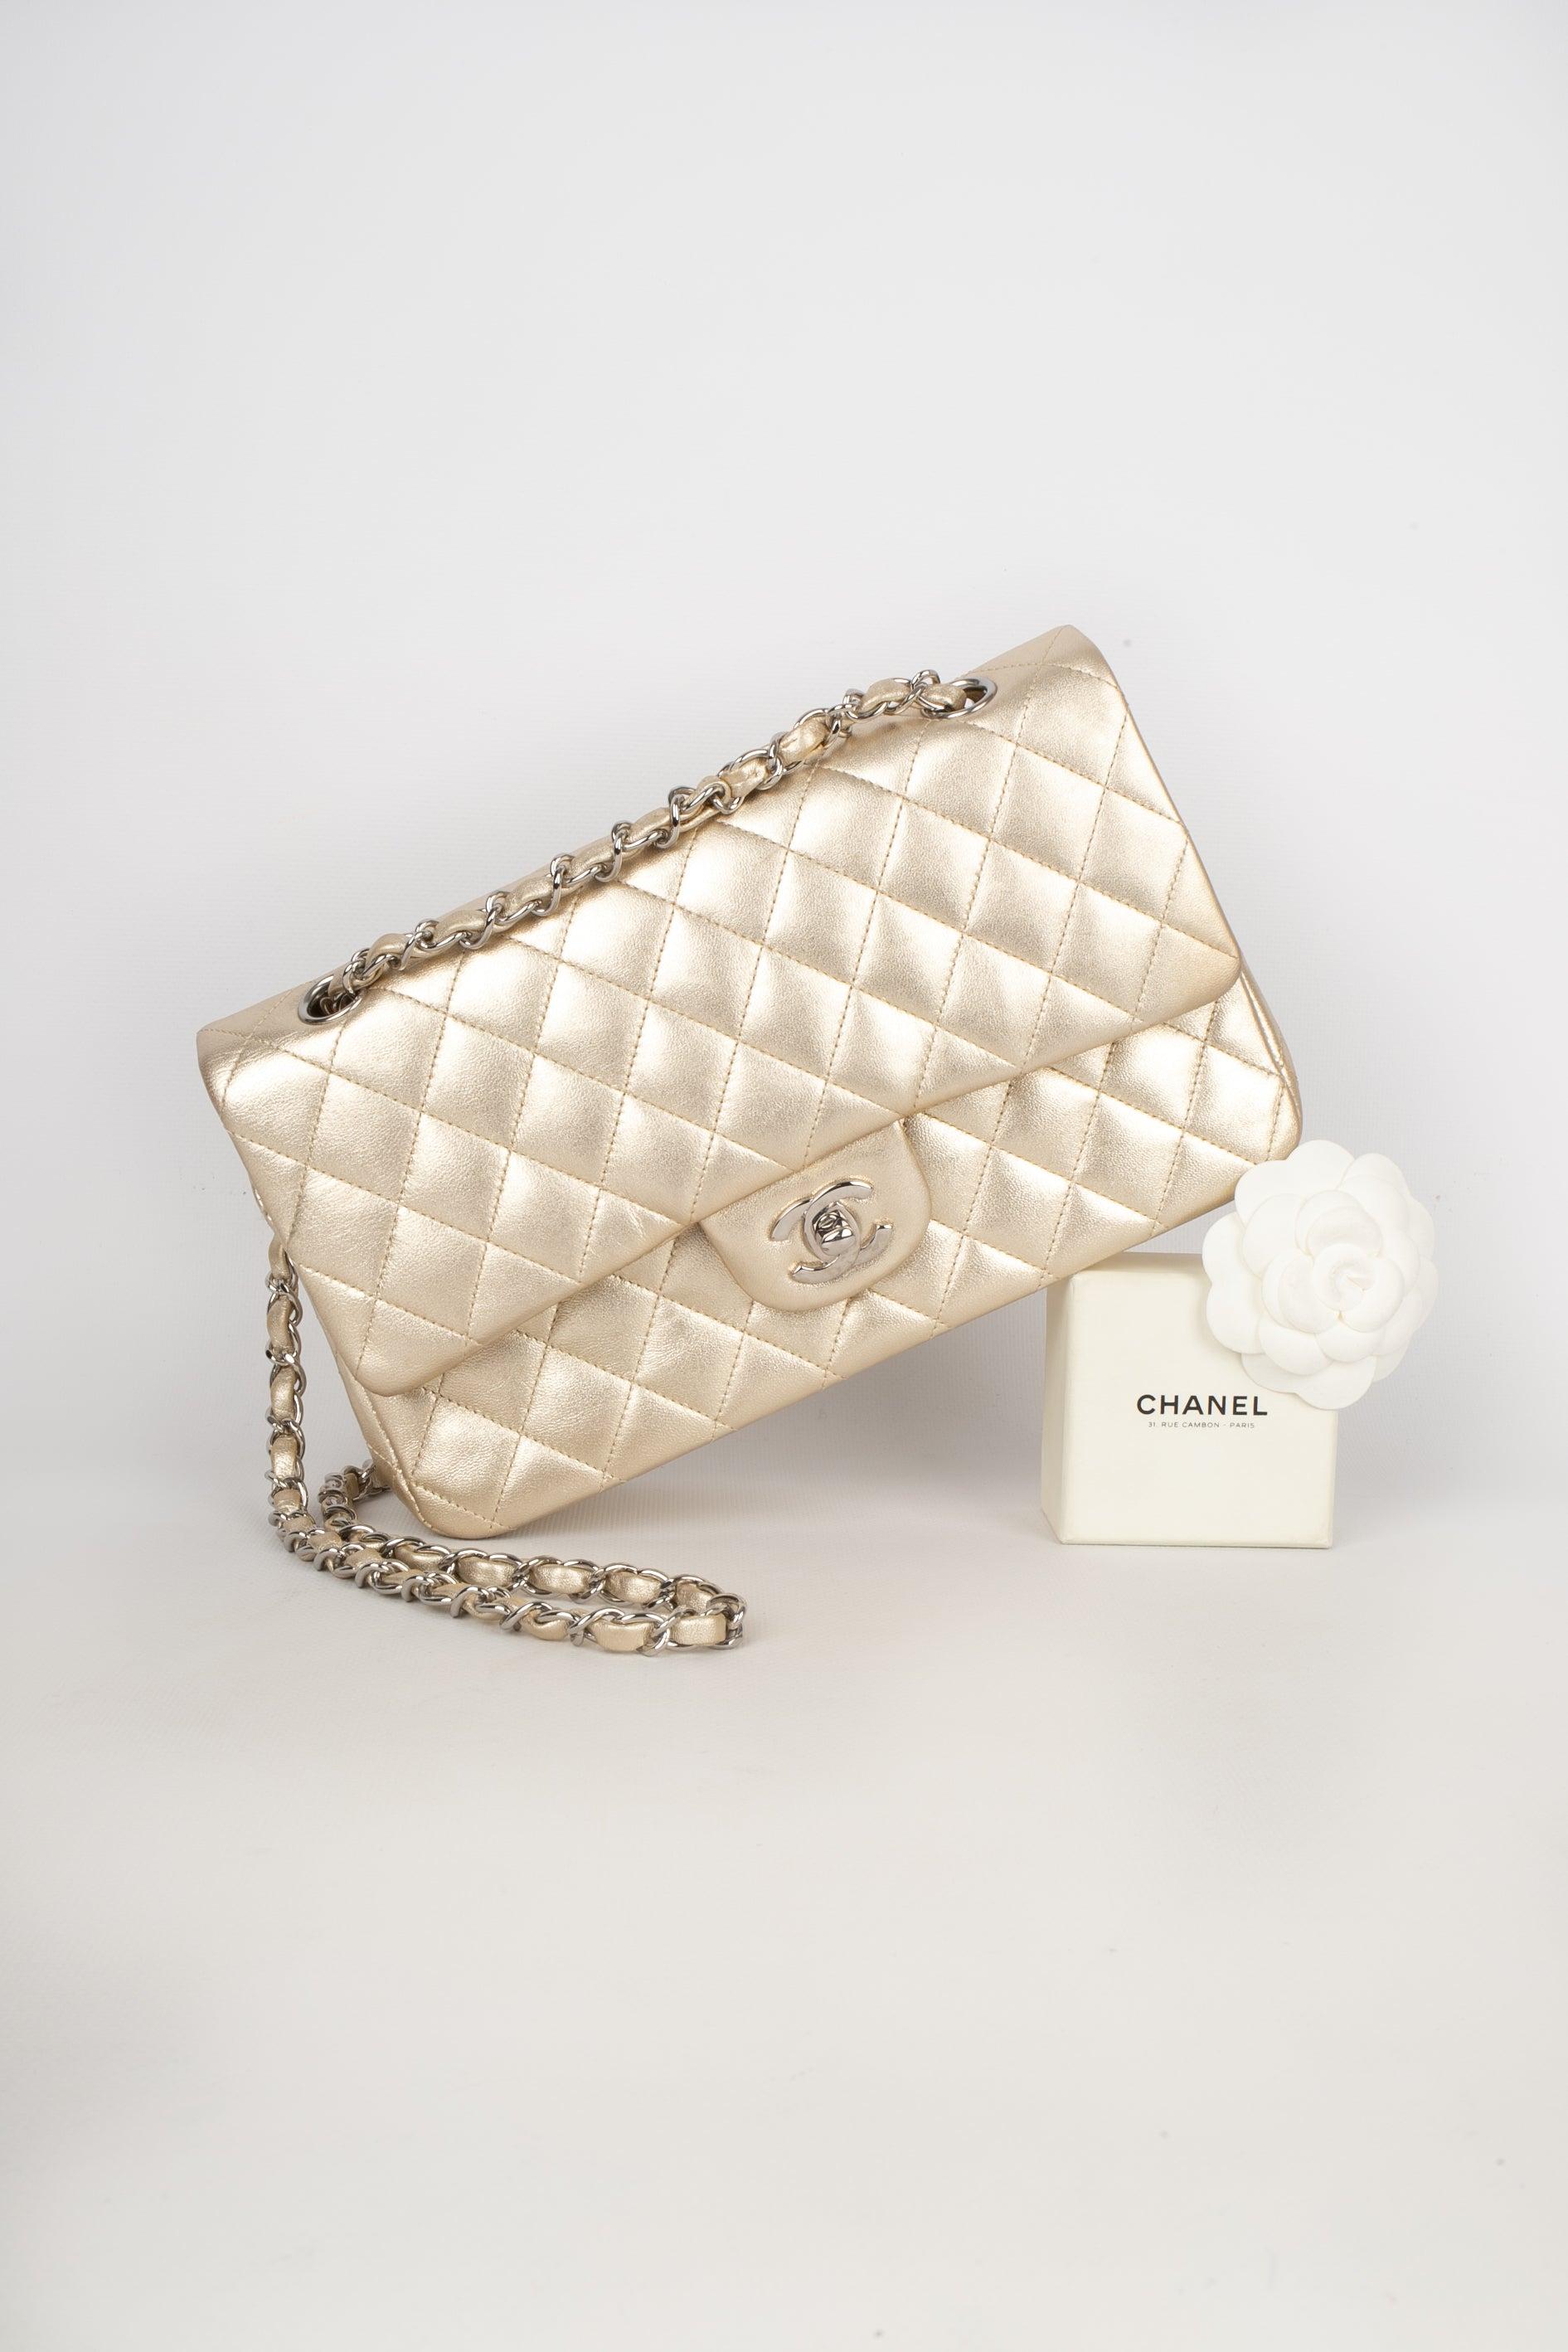 Chanel Timeless Pale-Golden Metallic Lamb Leather Classic Bag, 2006/2008 For Sale 10